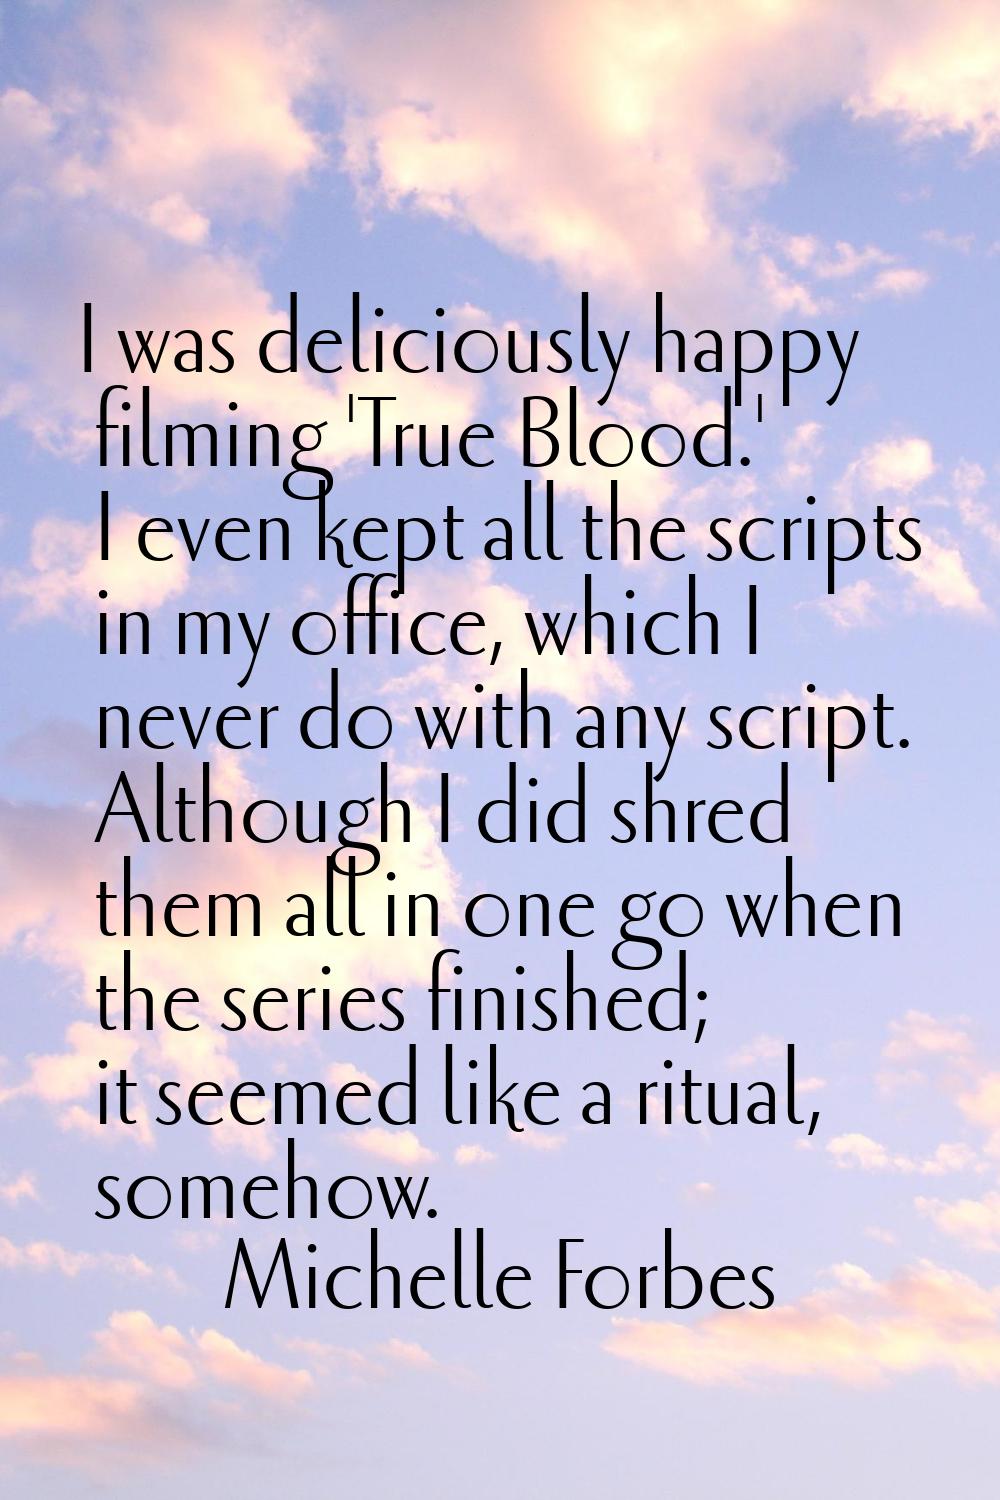 I was deliciously happy filming 'True Blood.' I even kept all the scripts in my office, which I nev